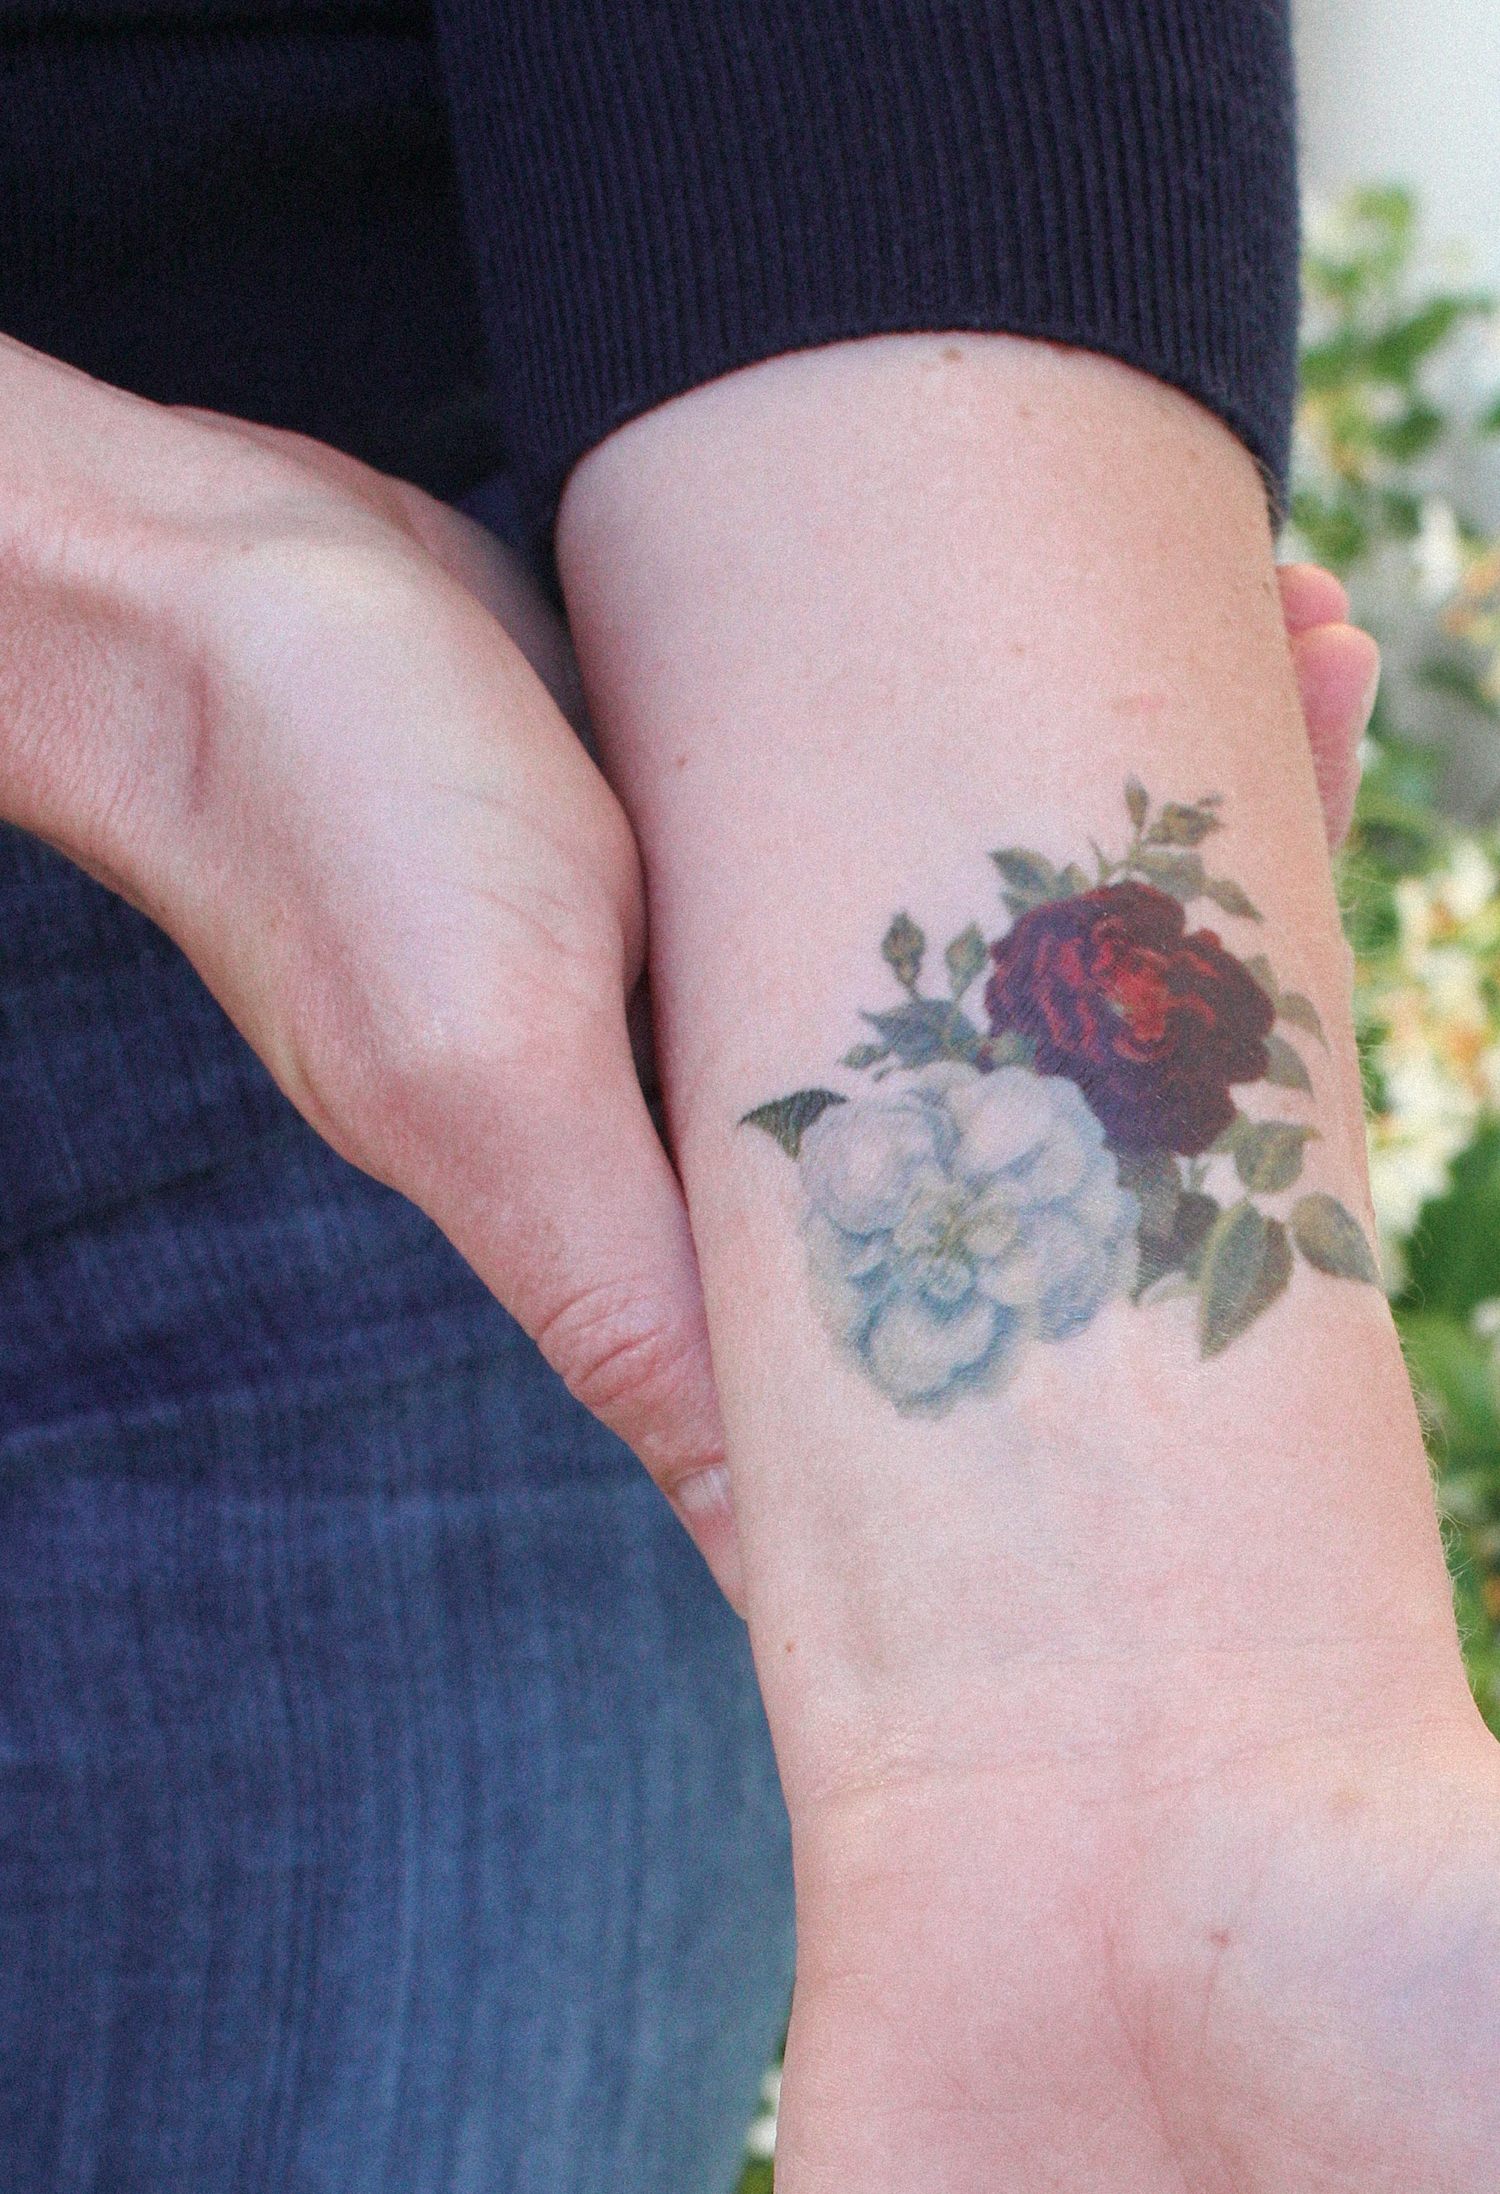 DIY Temporary Gold Tattoos - The Merrythought